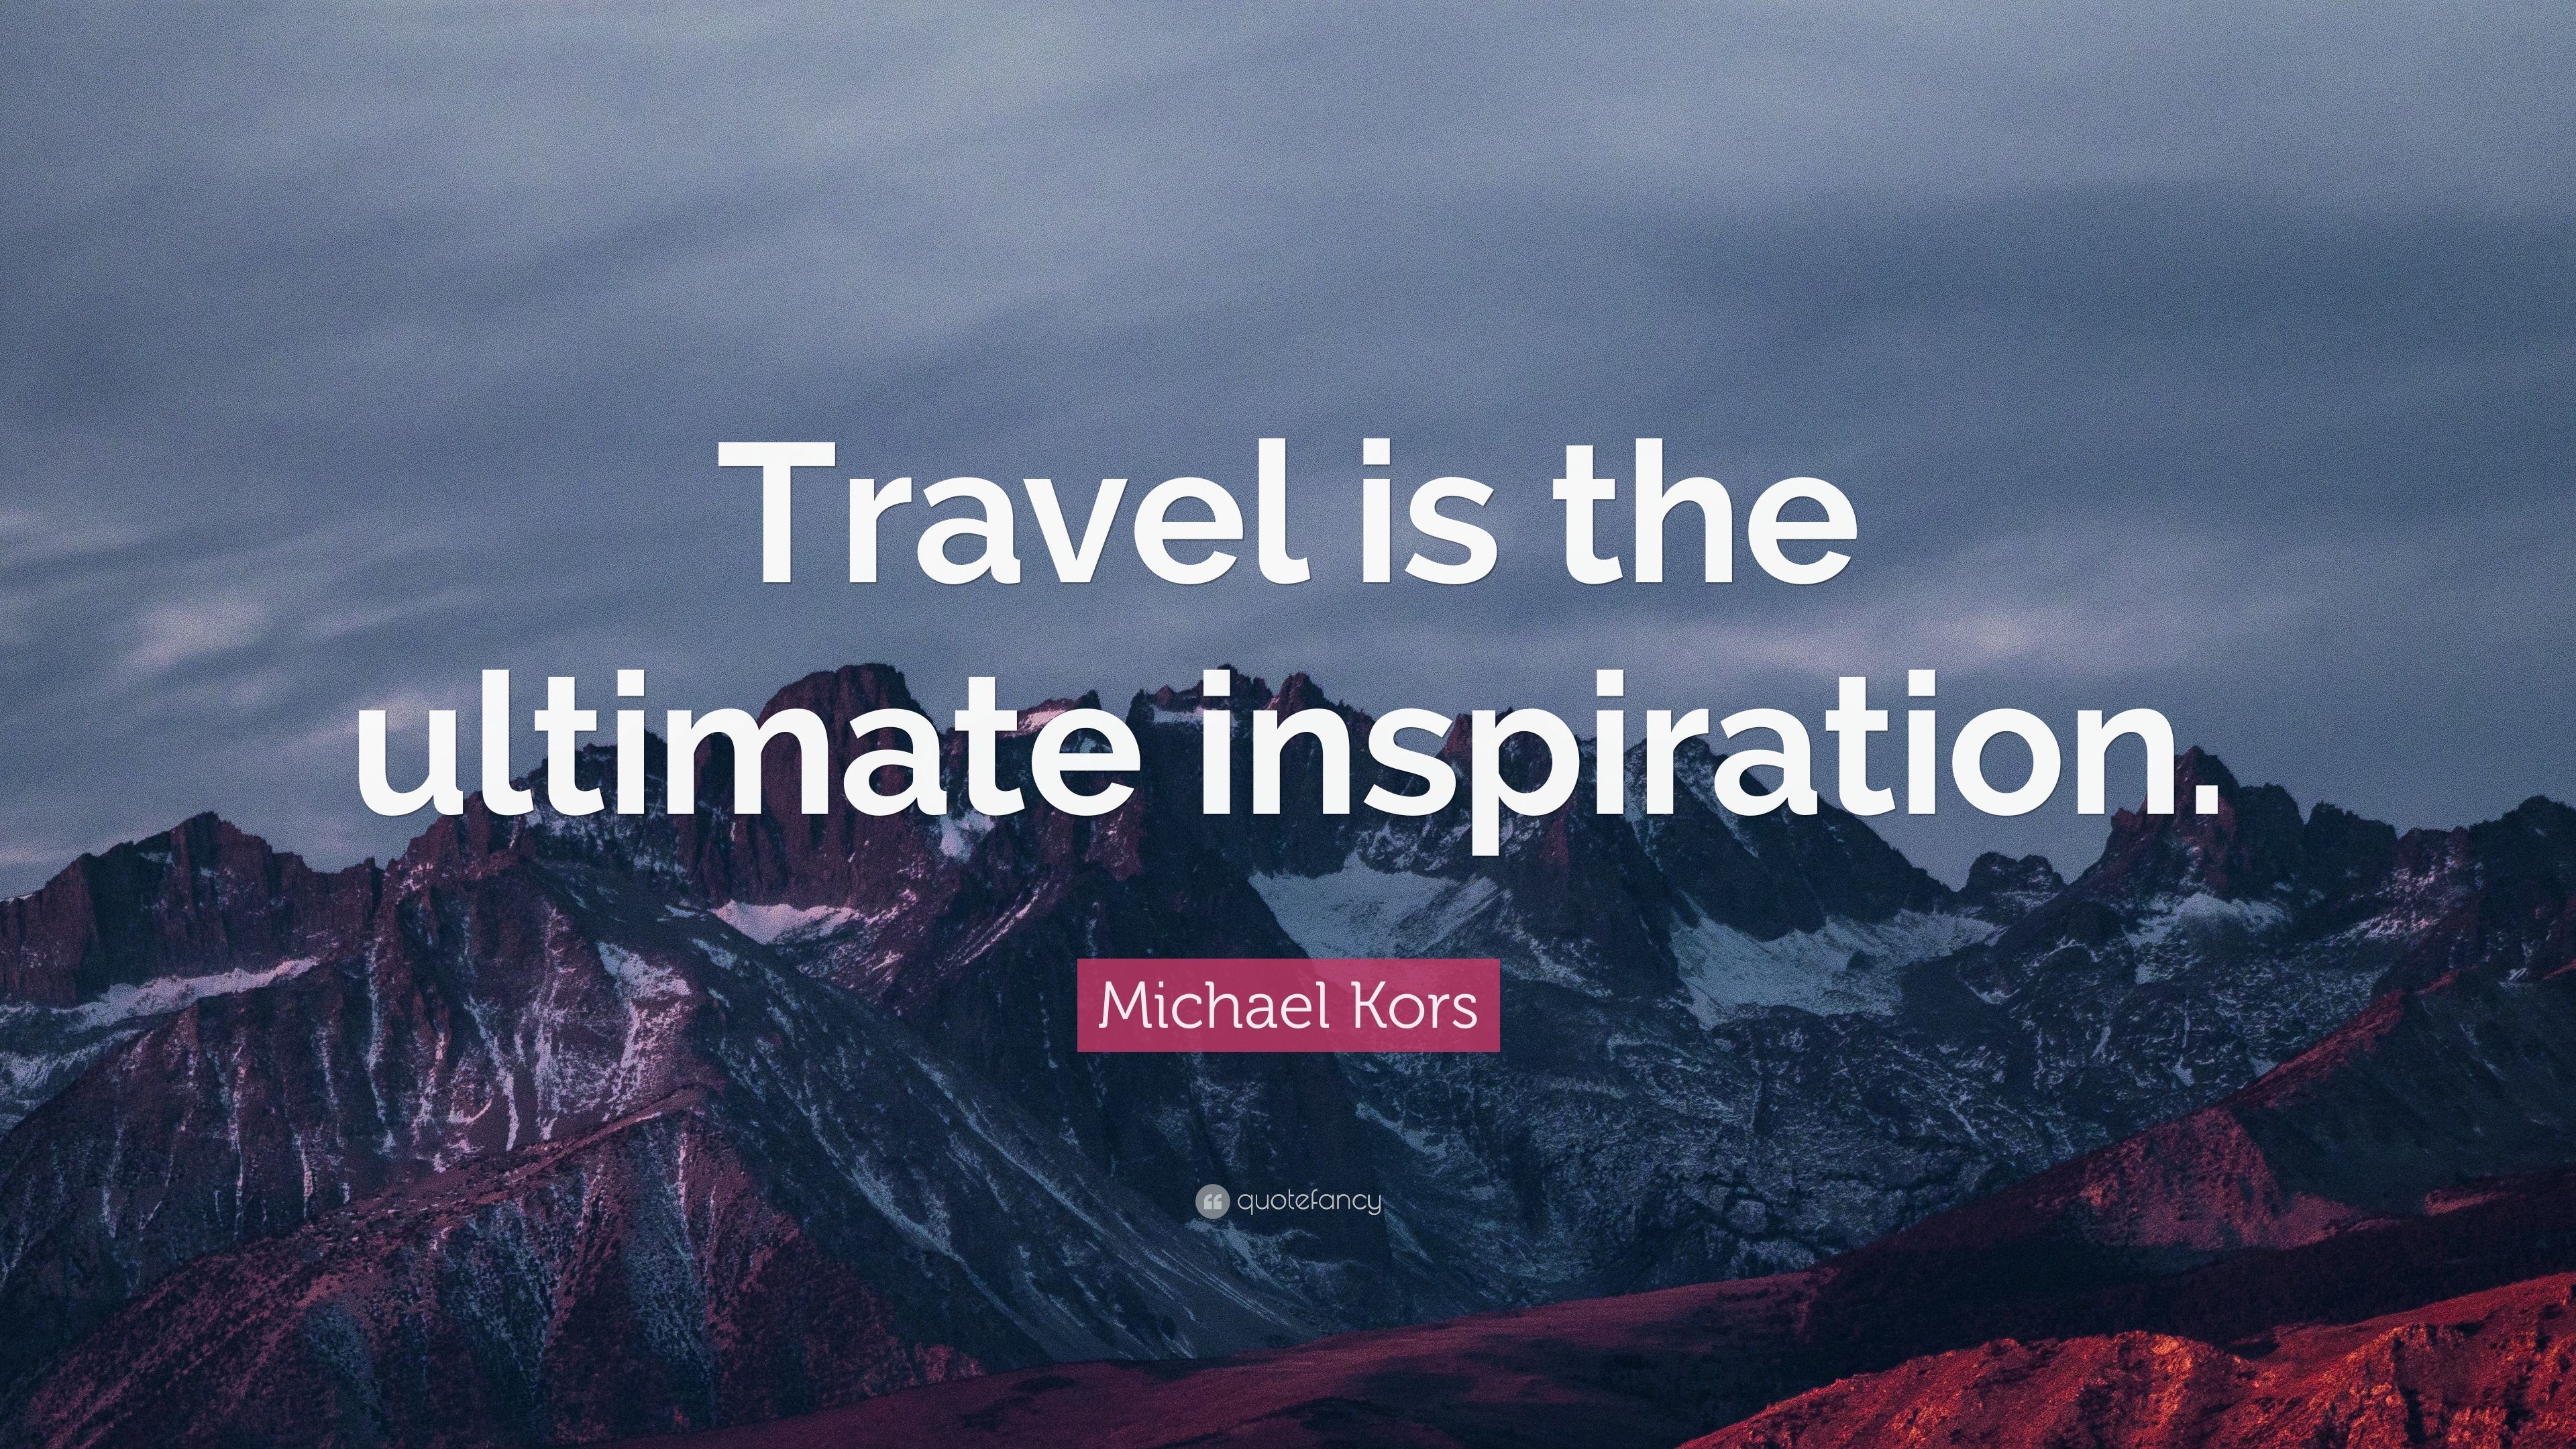 3840x2160 Michael Kors Quote: “Travel is the ultimate inspiration.”